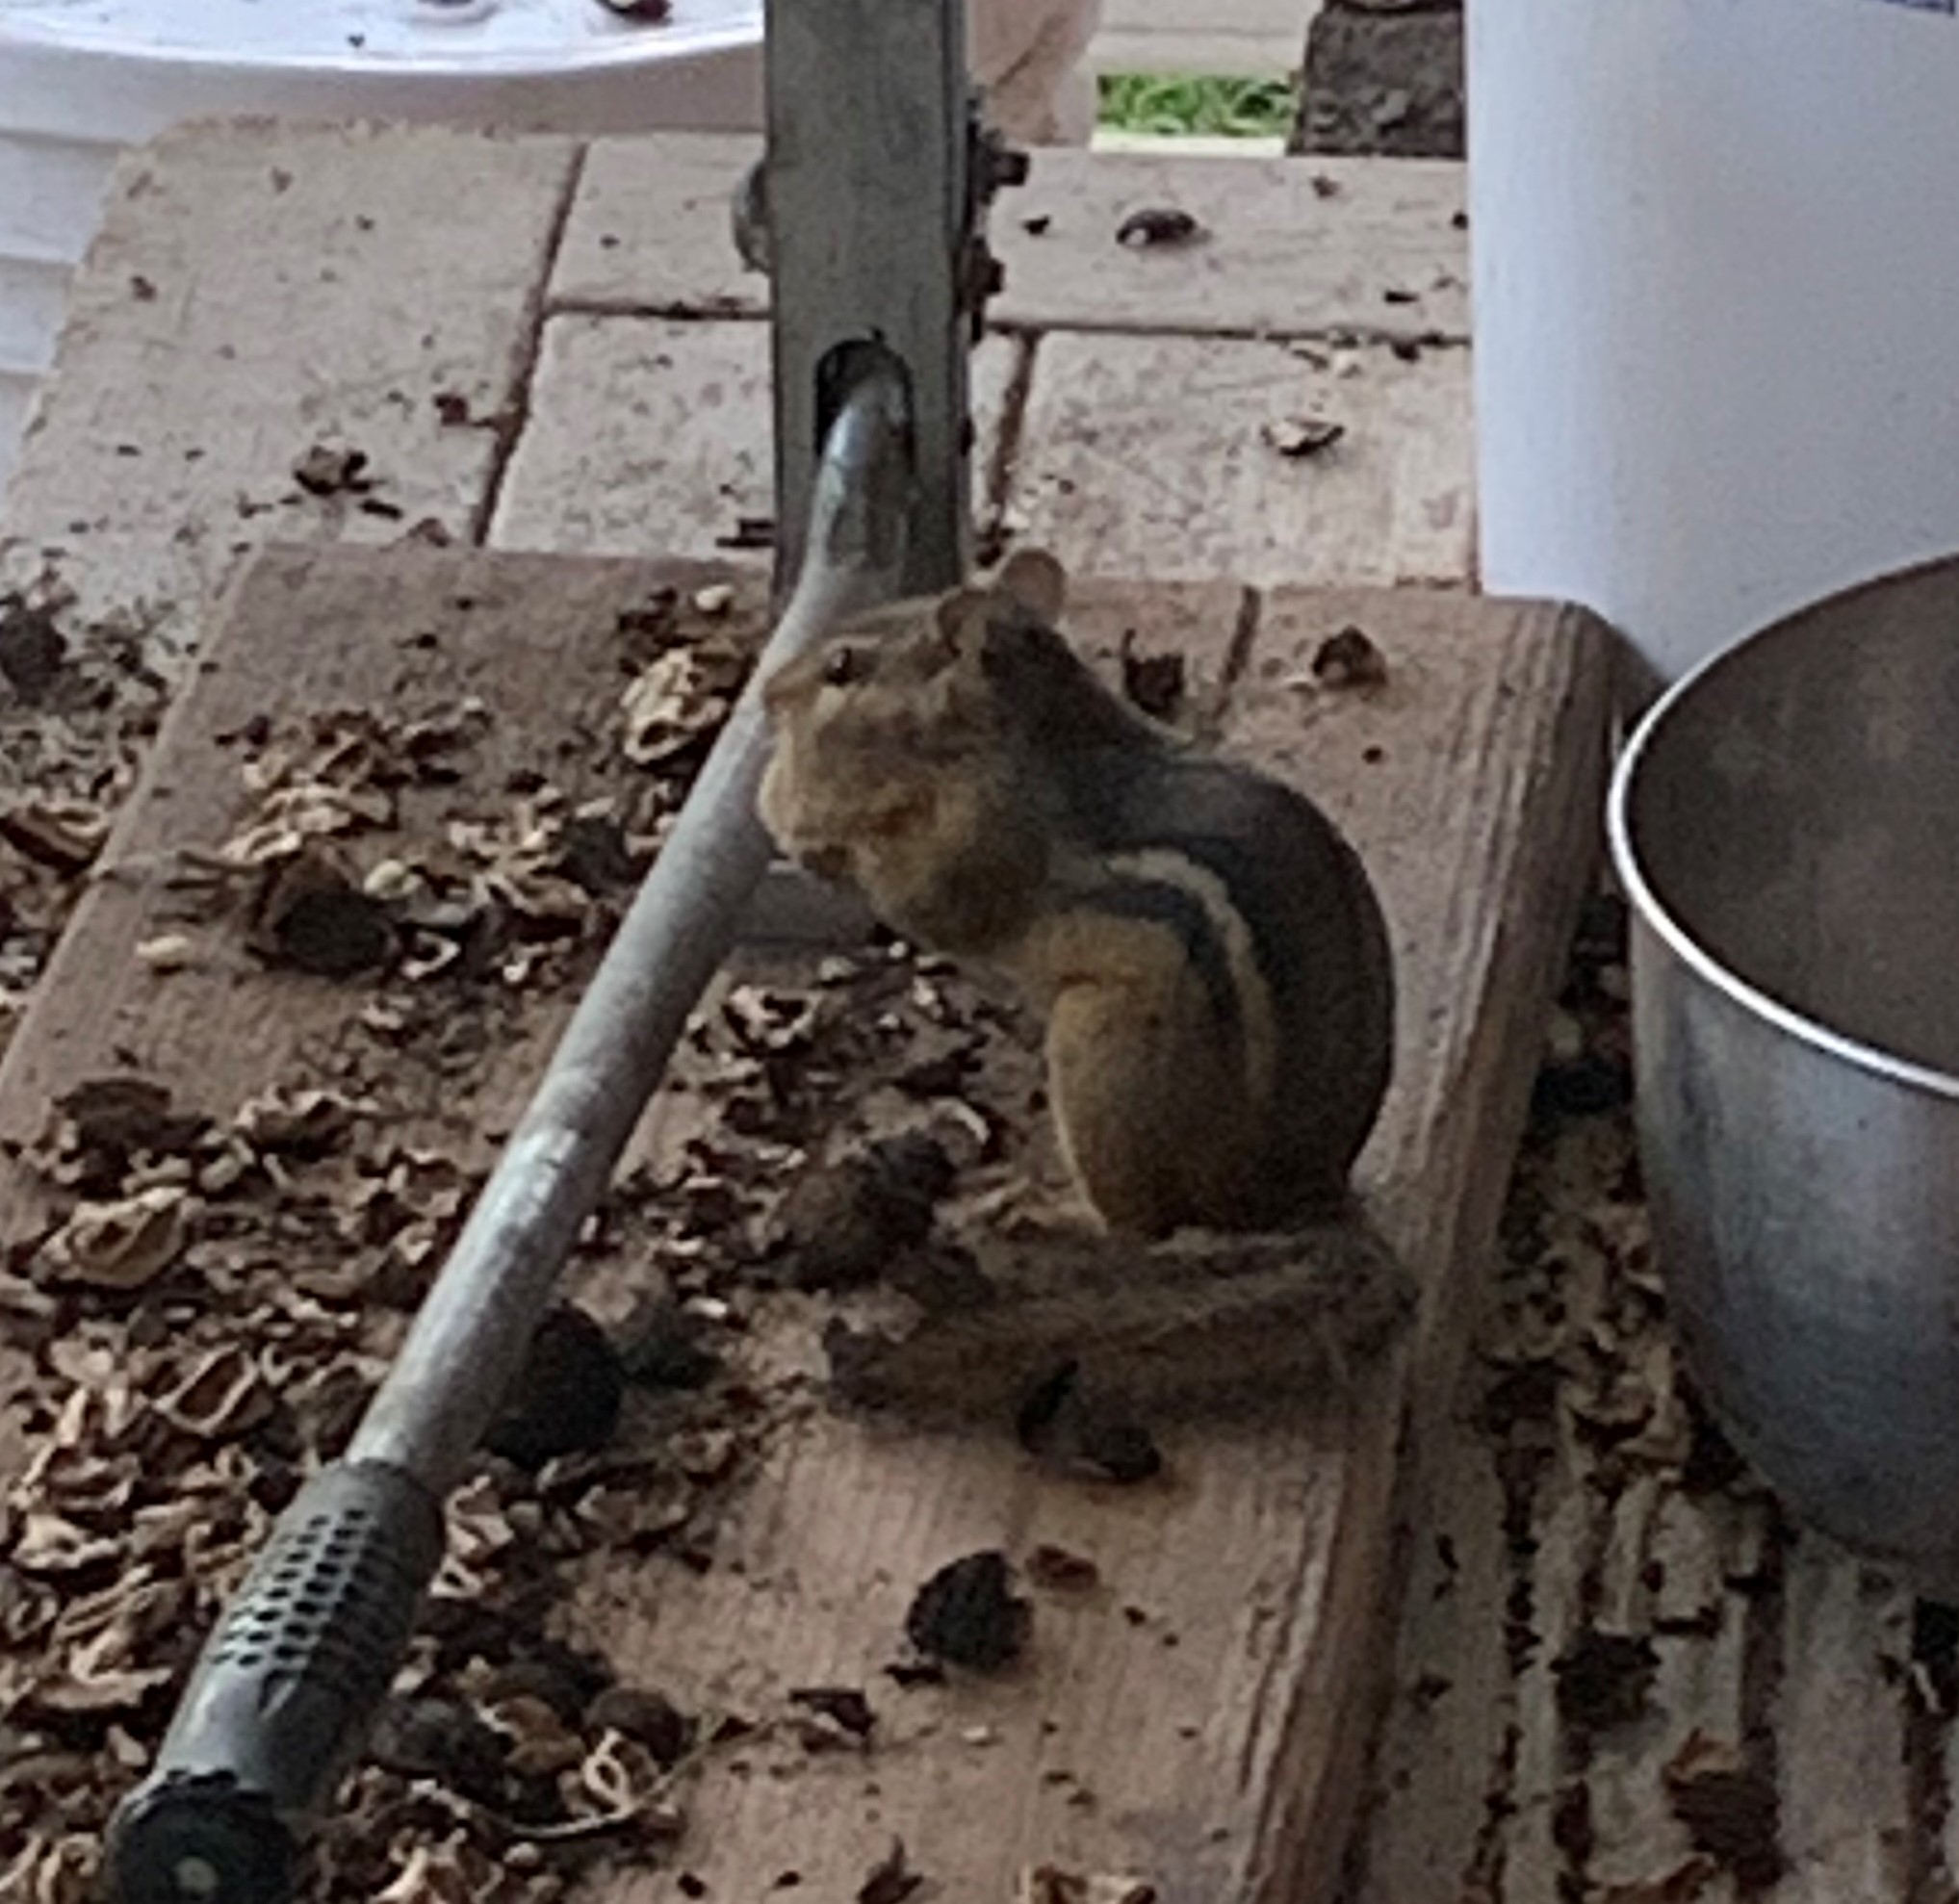 Chipmunk sitting upright near a nut cracker, stuffing its cheek pouches with nut meats